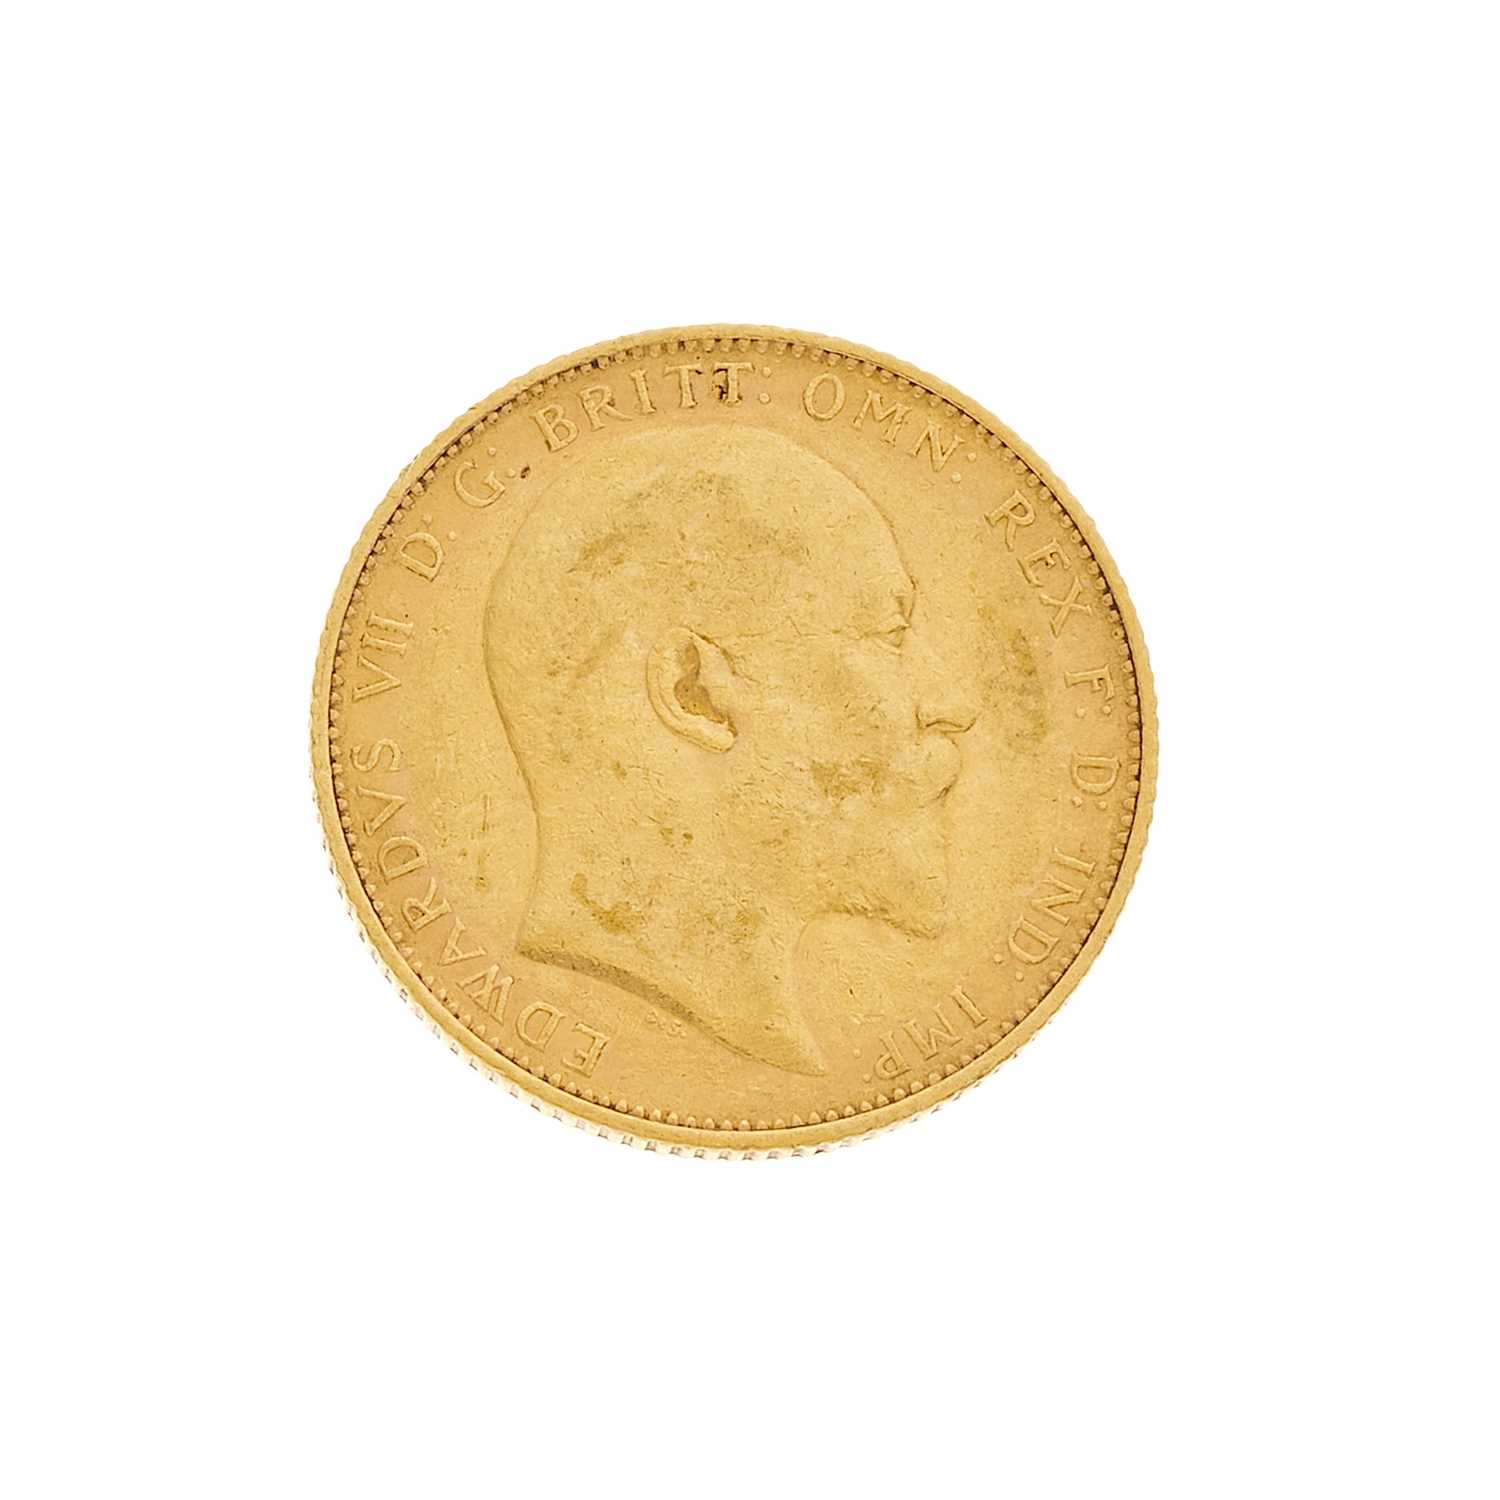 Lot 28 - Edward VII, a gold full sovereign coin dated 1905